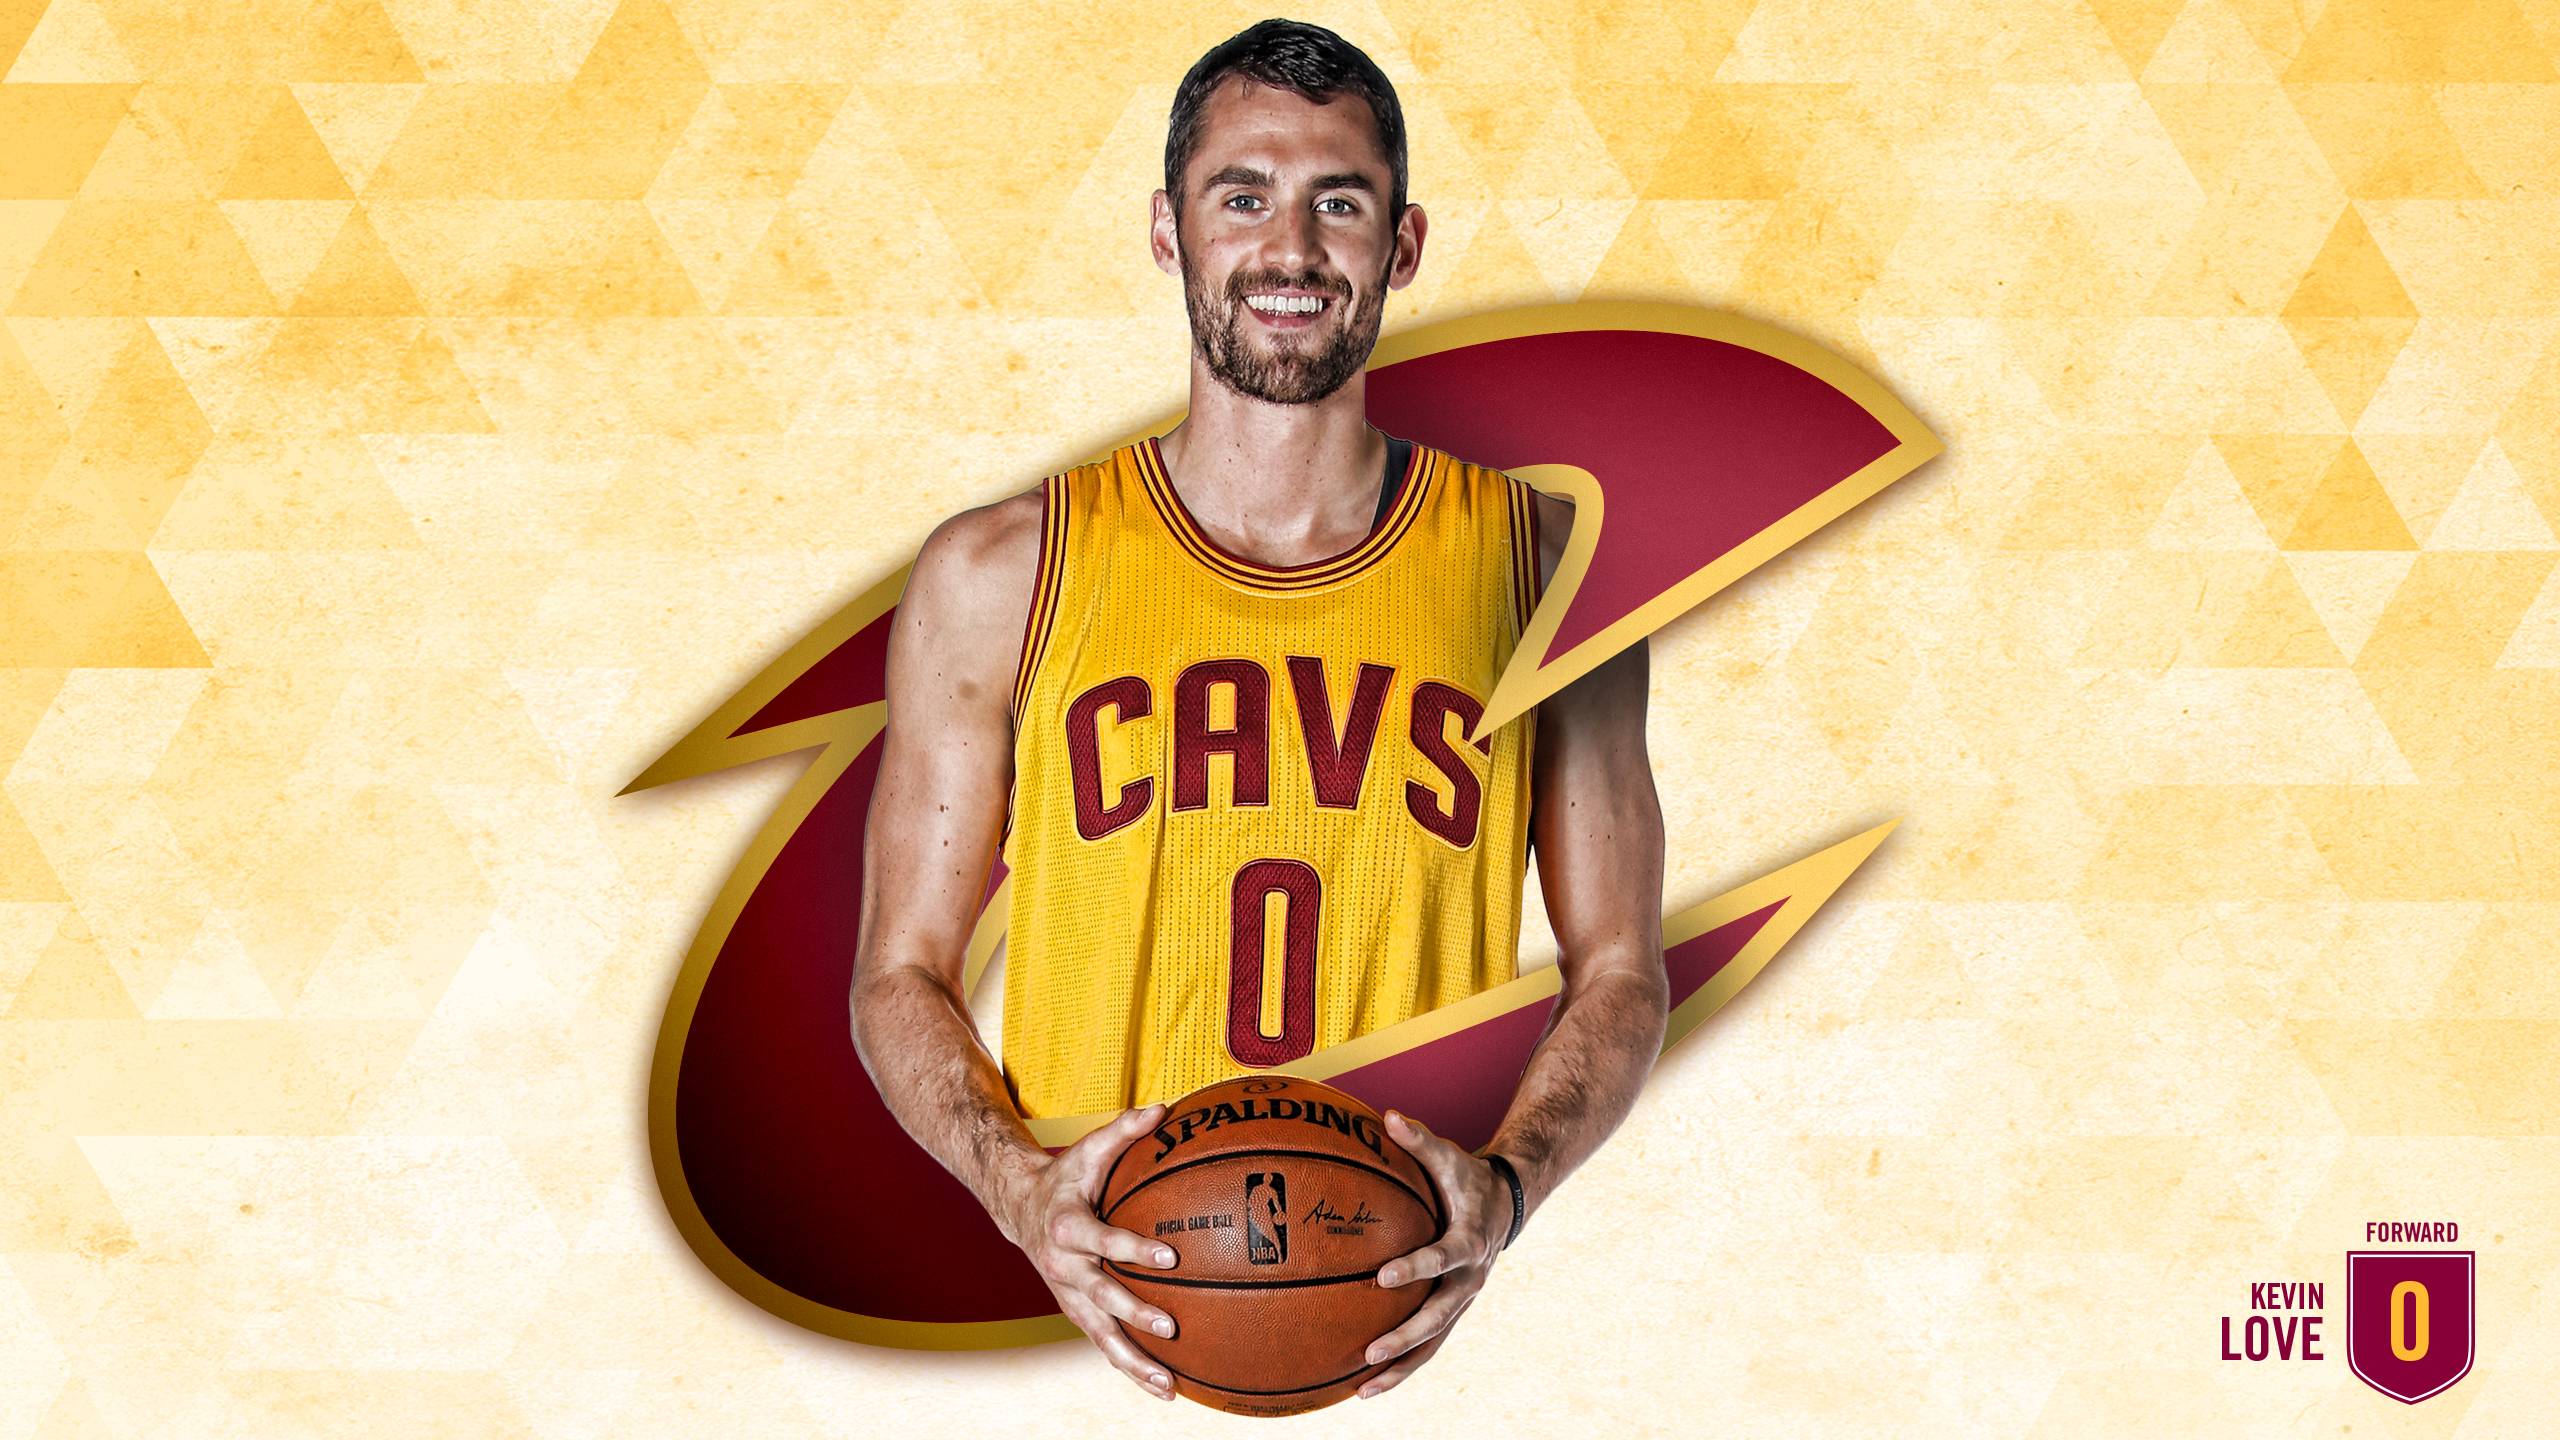 image For > Kevin Love Cavs